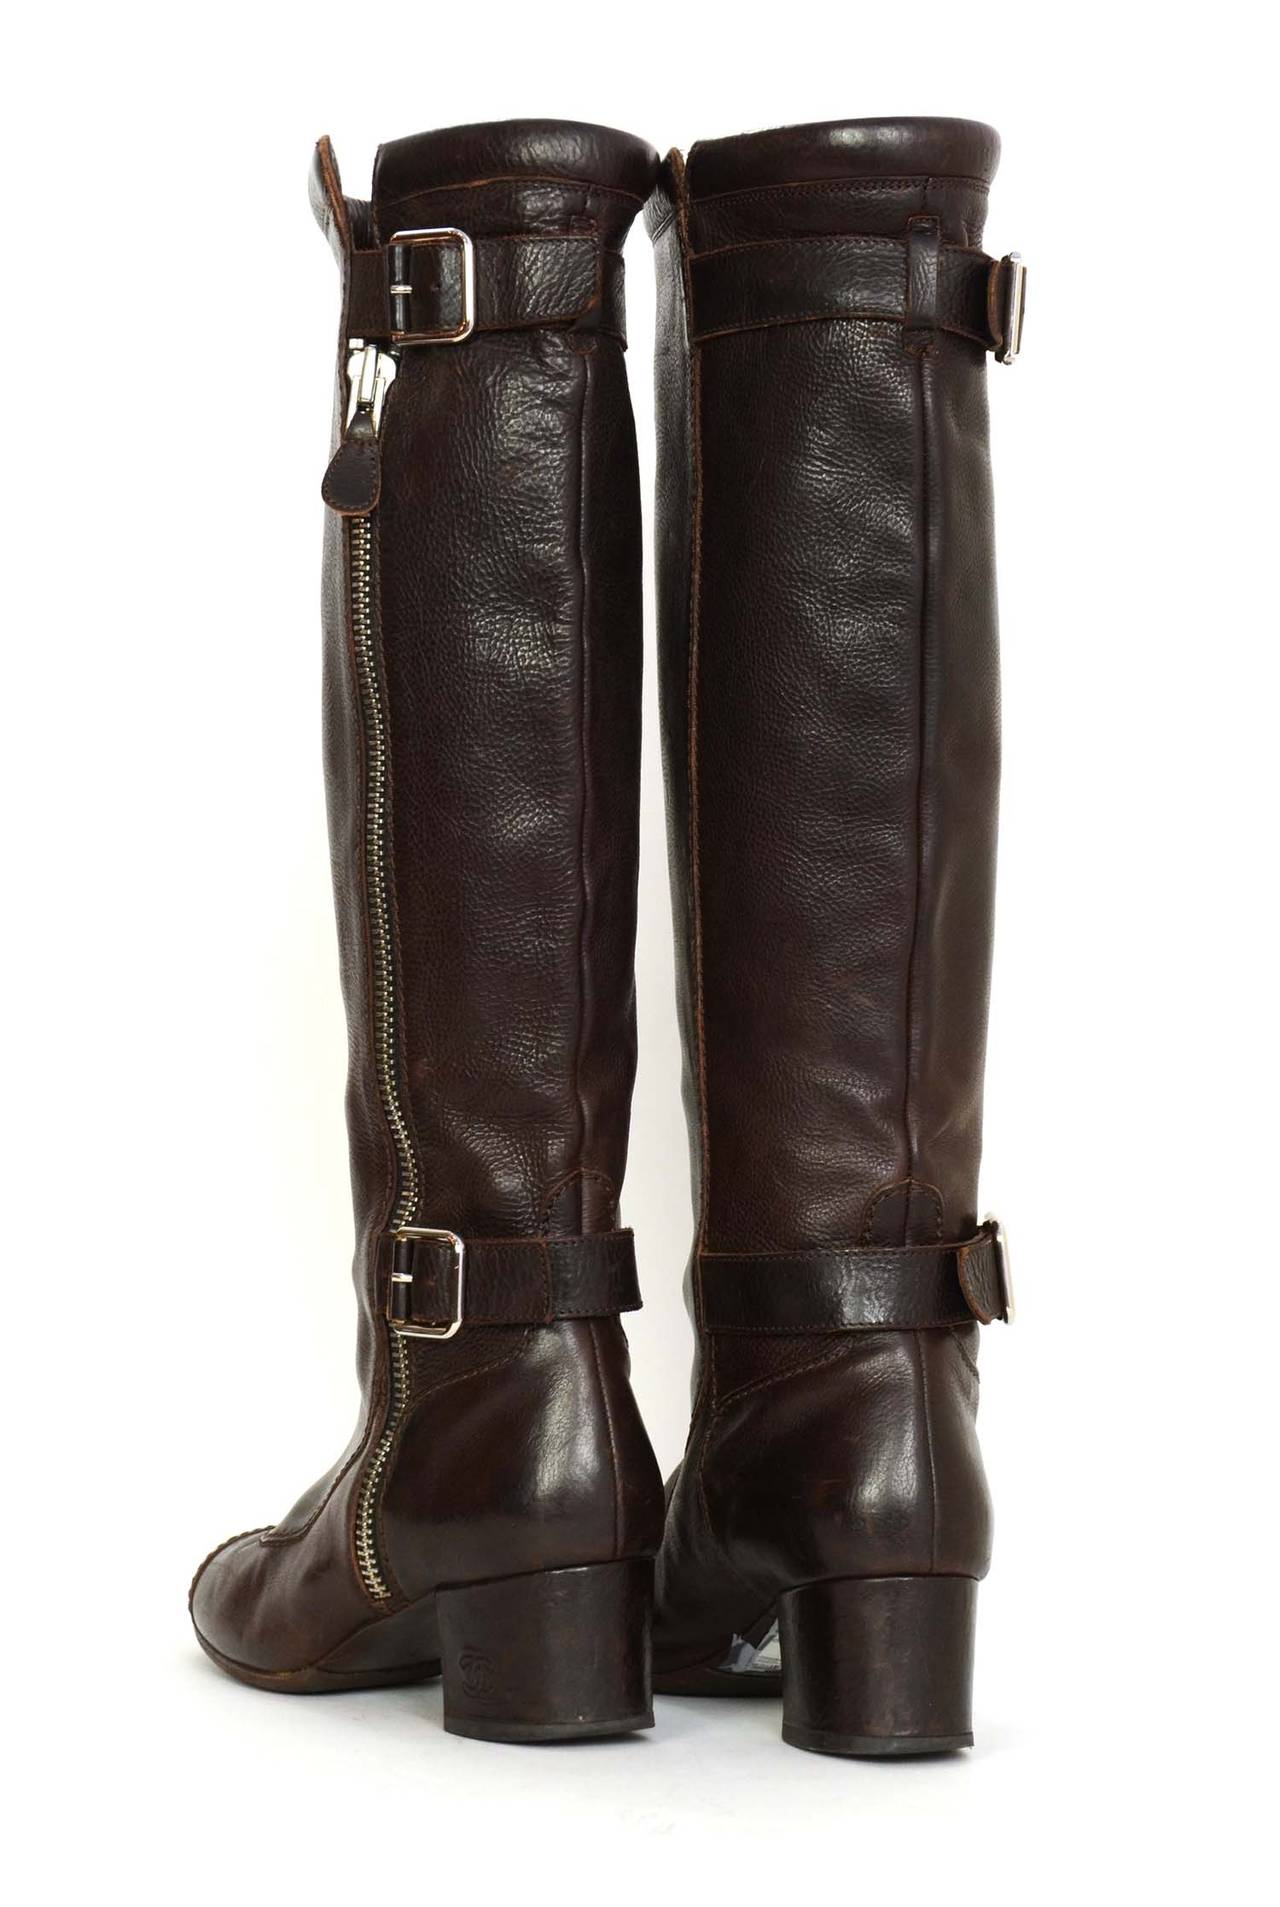 Women's CHANEL Brown Leather Riding Boots sz 38